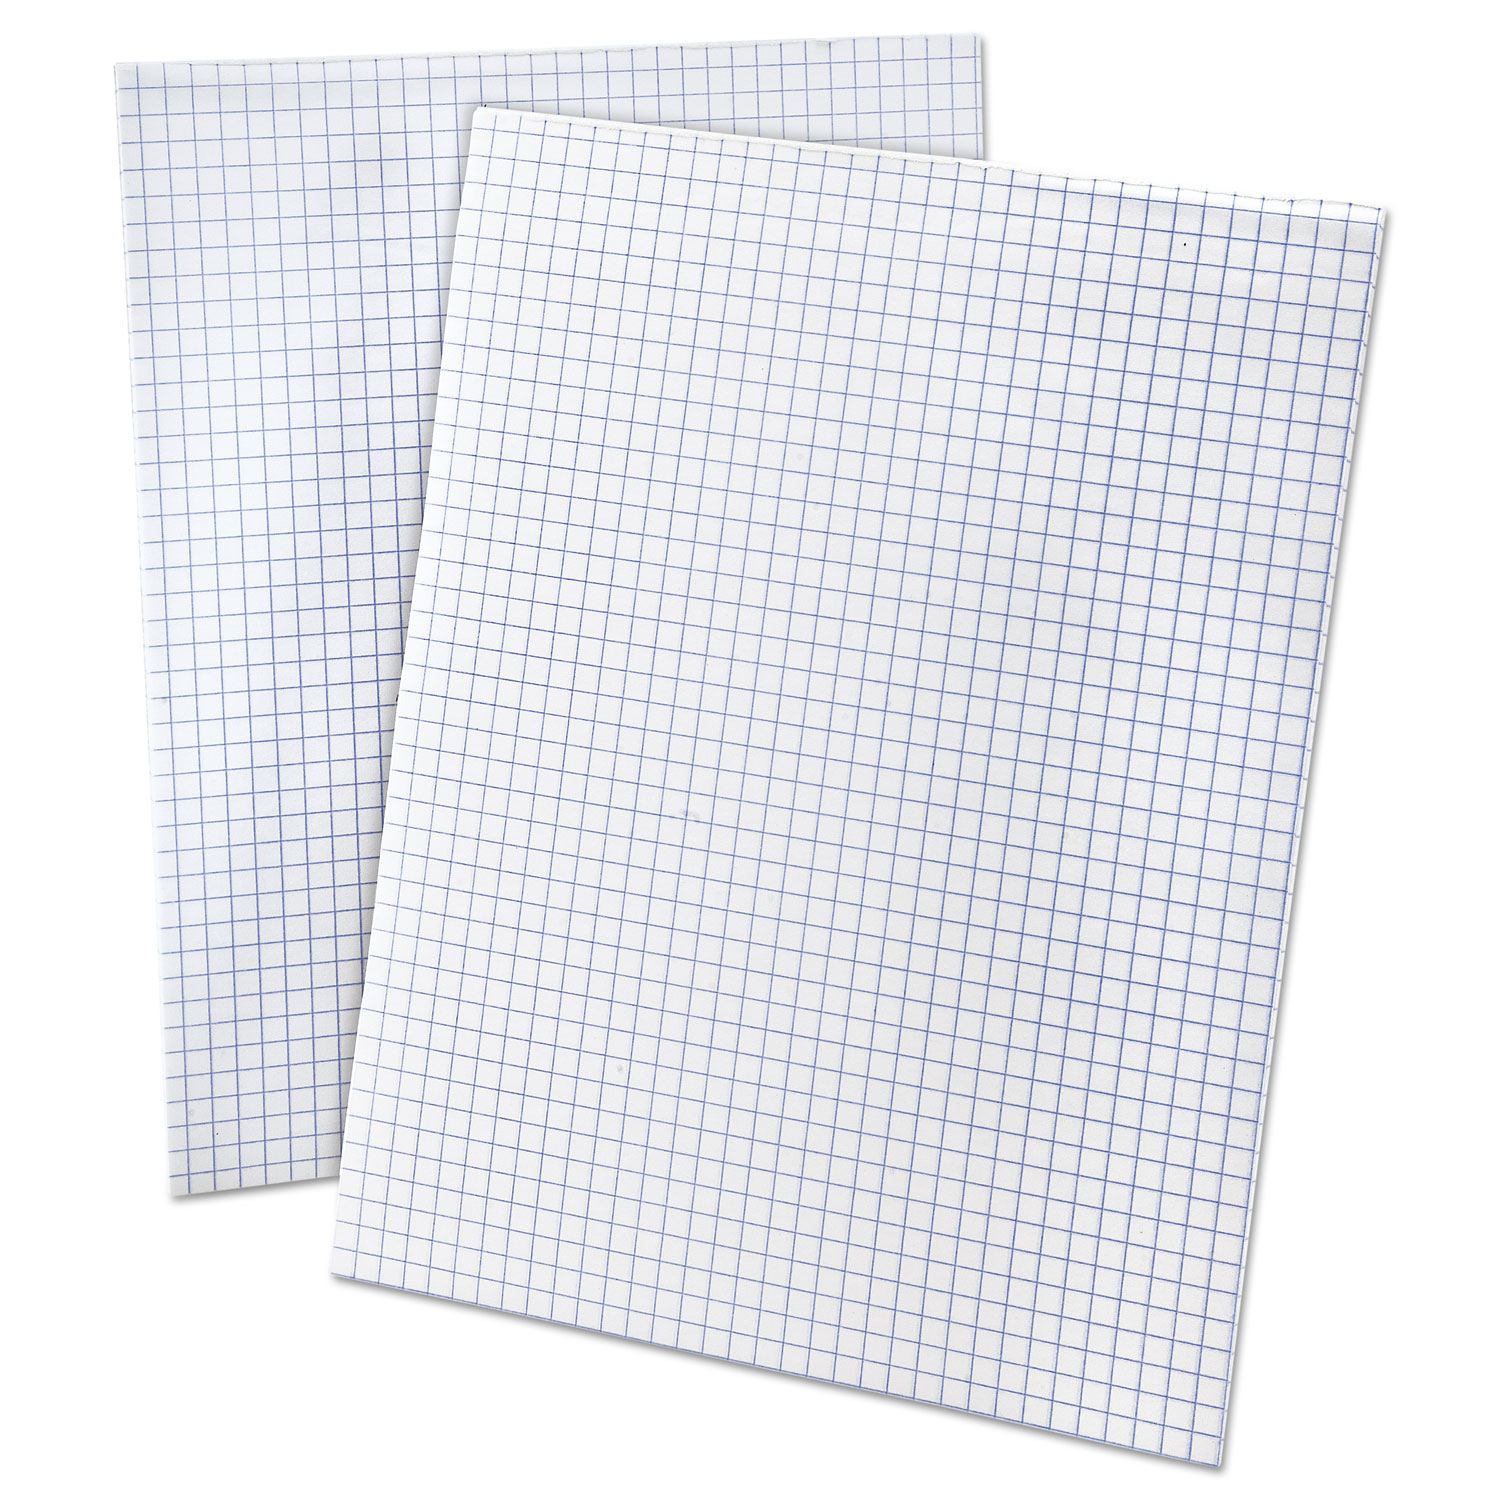 17″ x 11″ Inches Top Desk Double Sided Graph Paper Pad Pack of 4